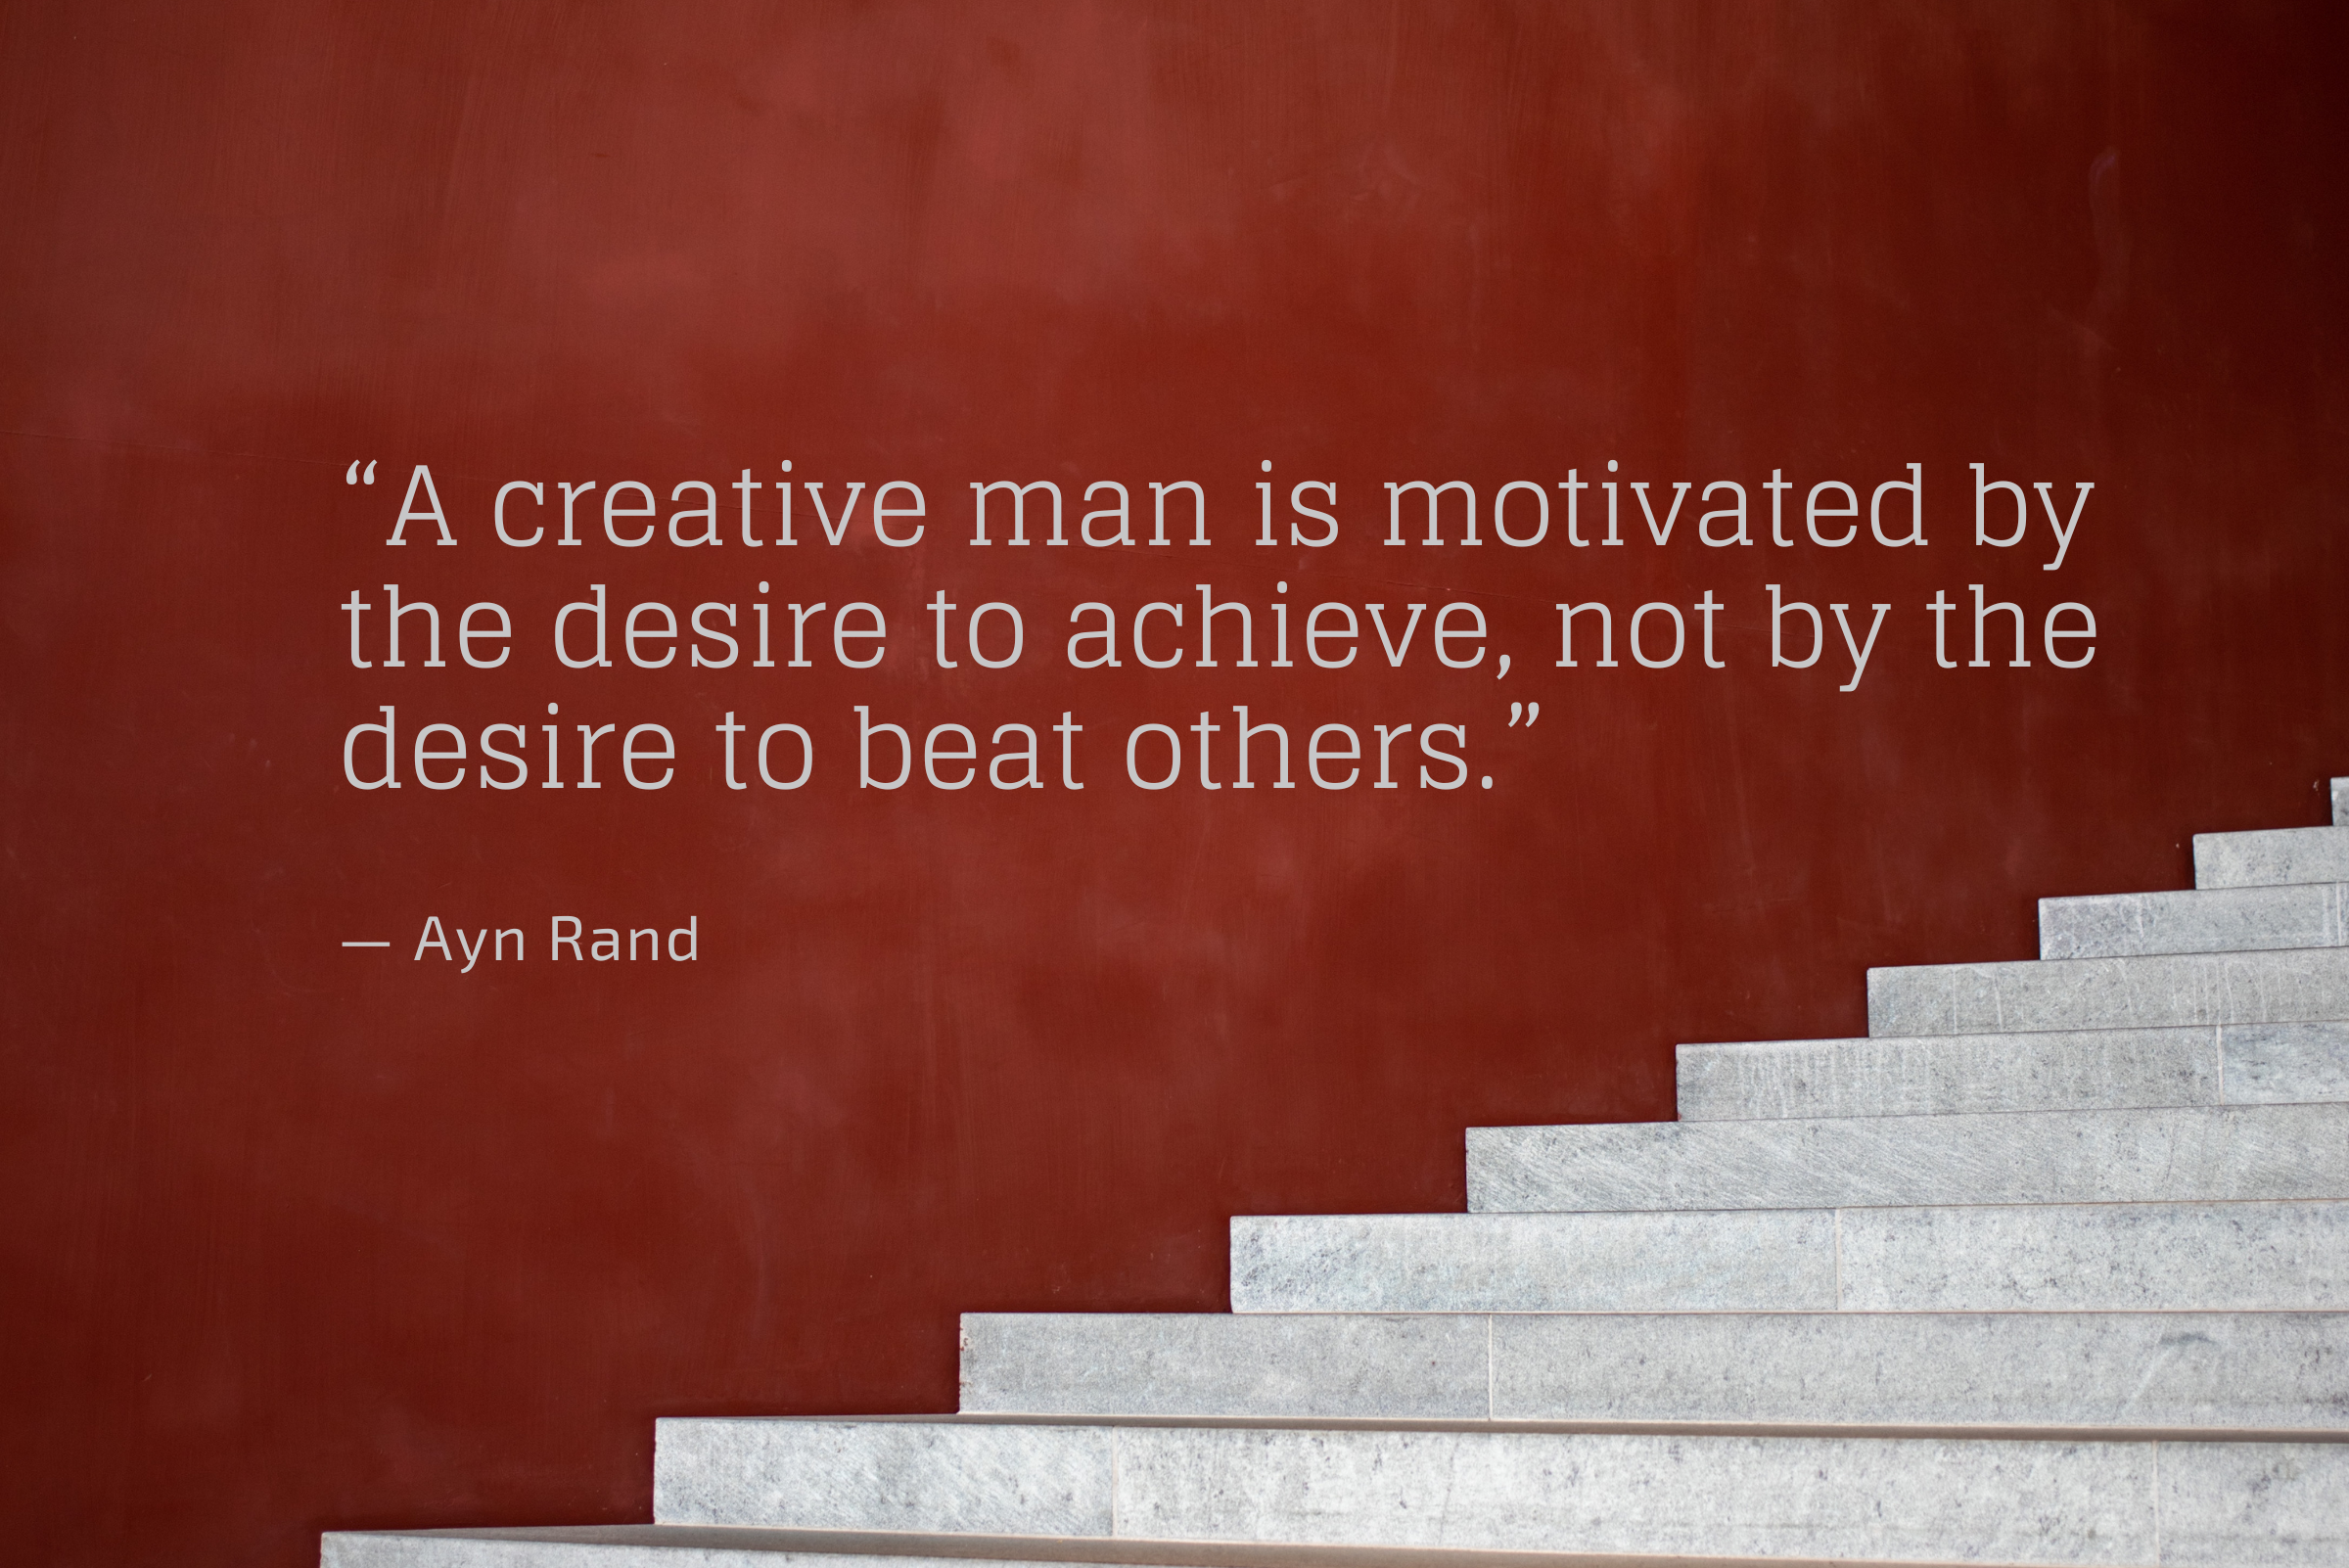 A creative man is motivated by the desire to achieve not by the desire to beat others - Hope and Belief.